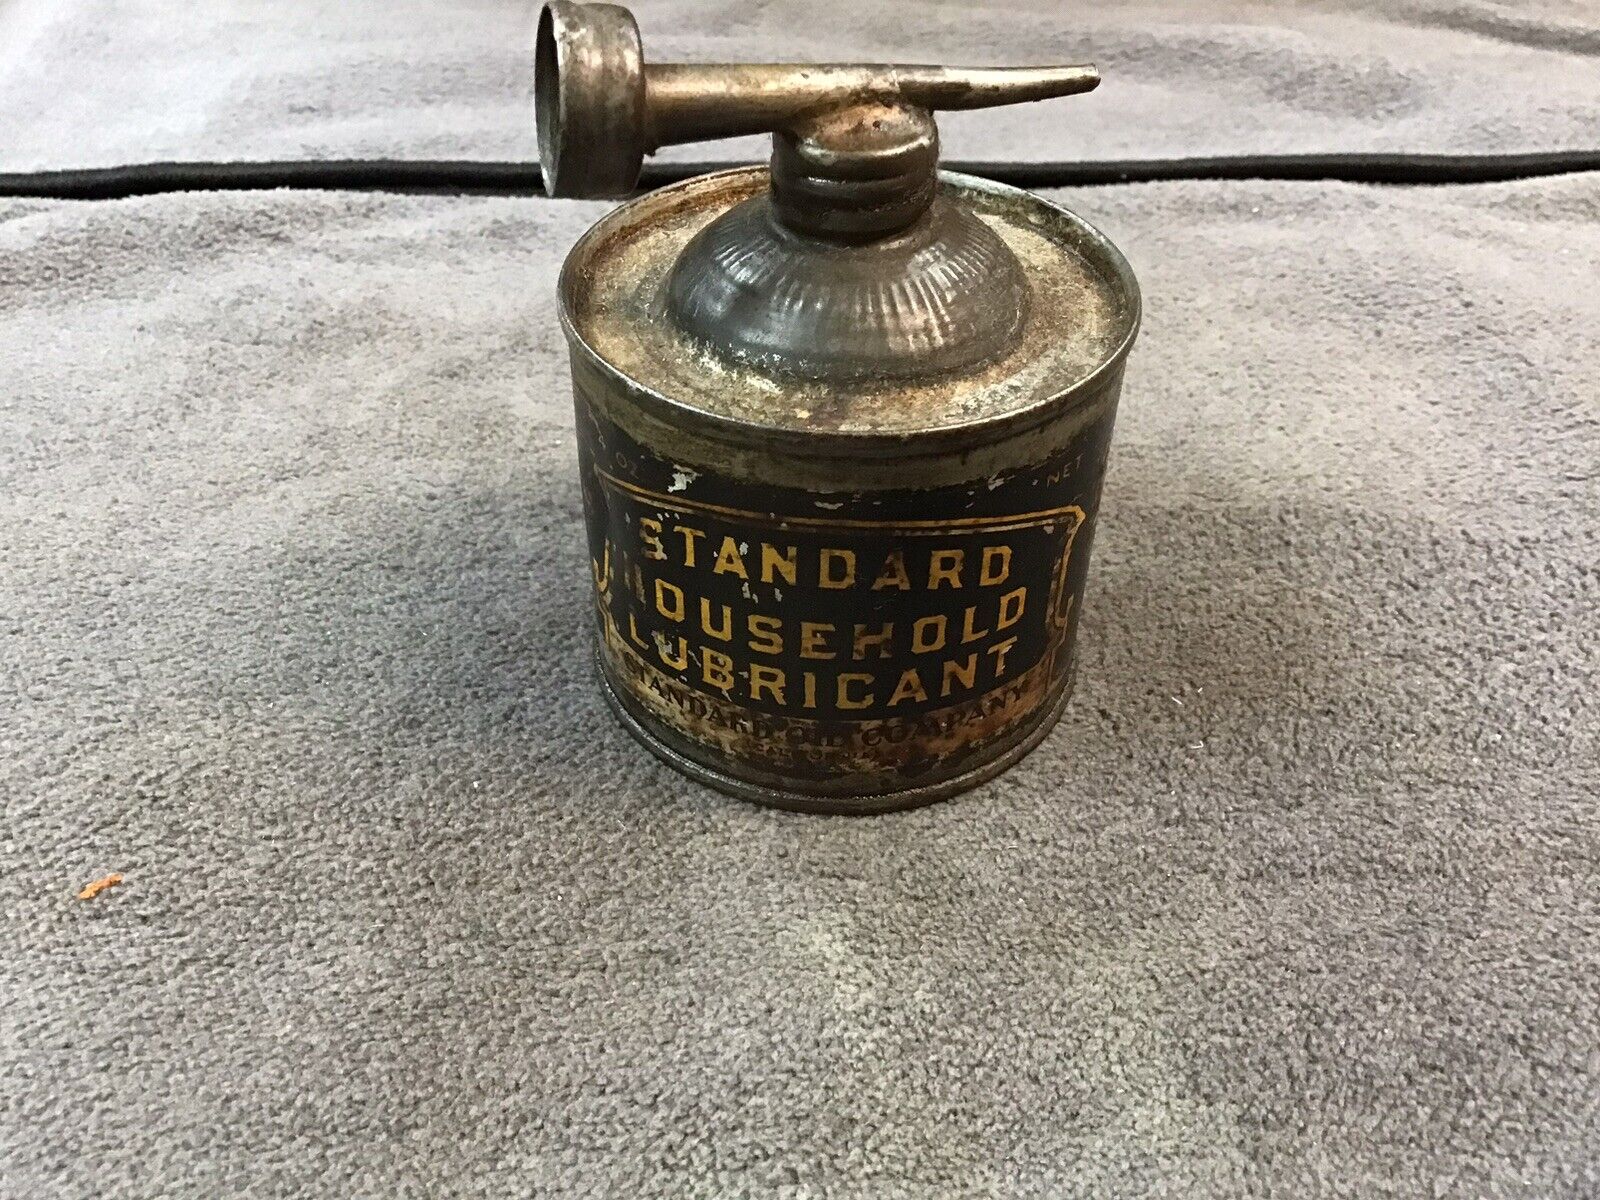 Antique Standard Oil Company of California Household Lubricant Metal Oiler